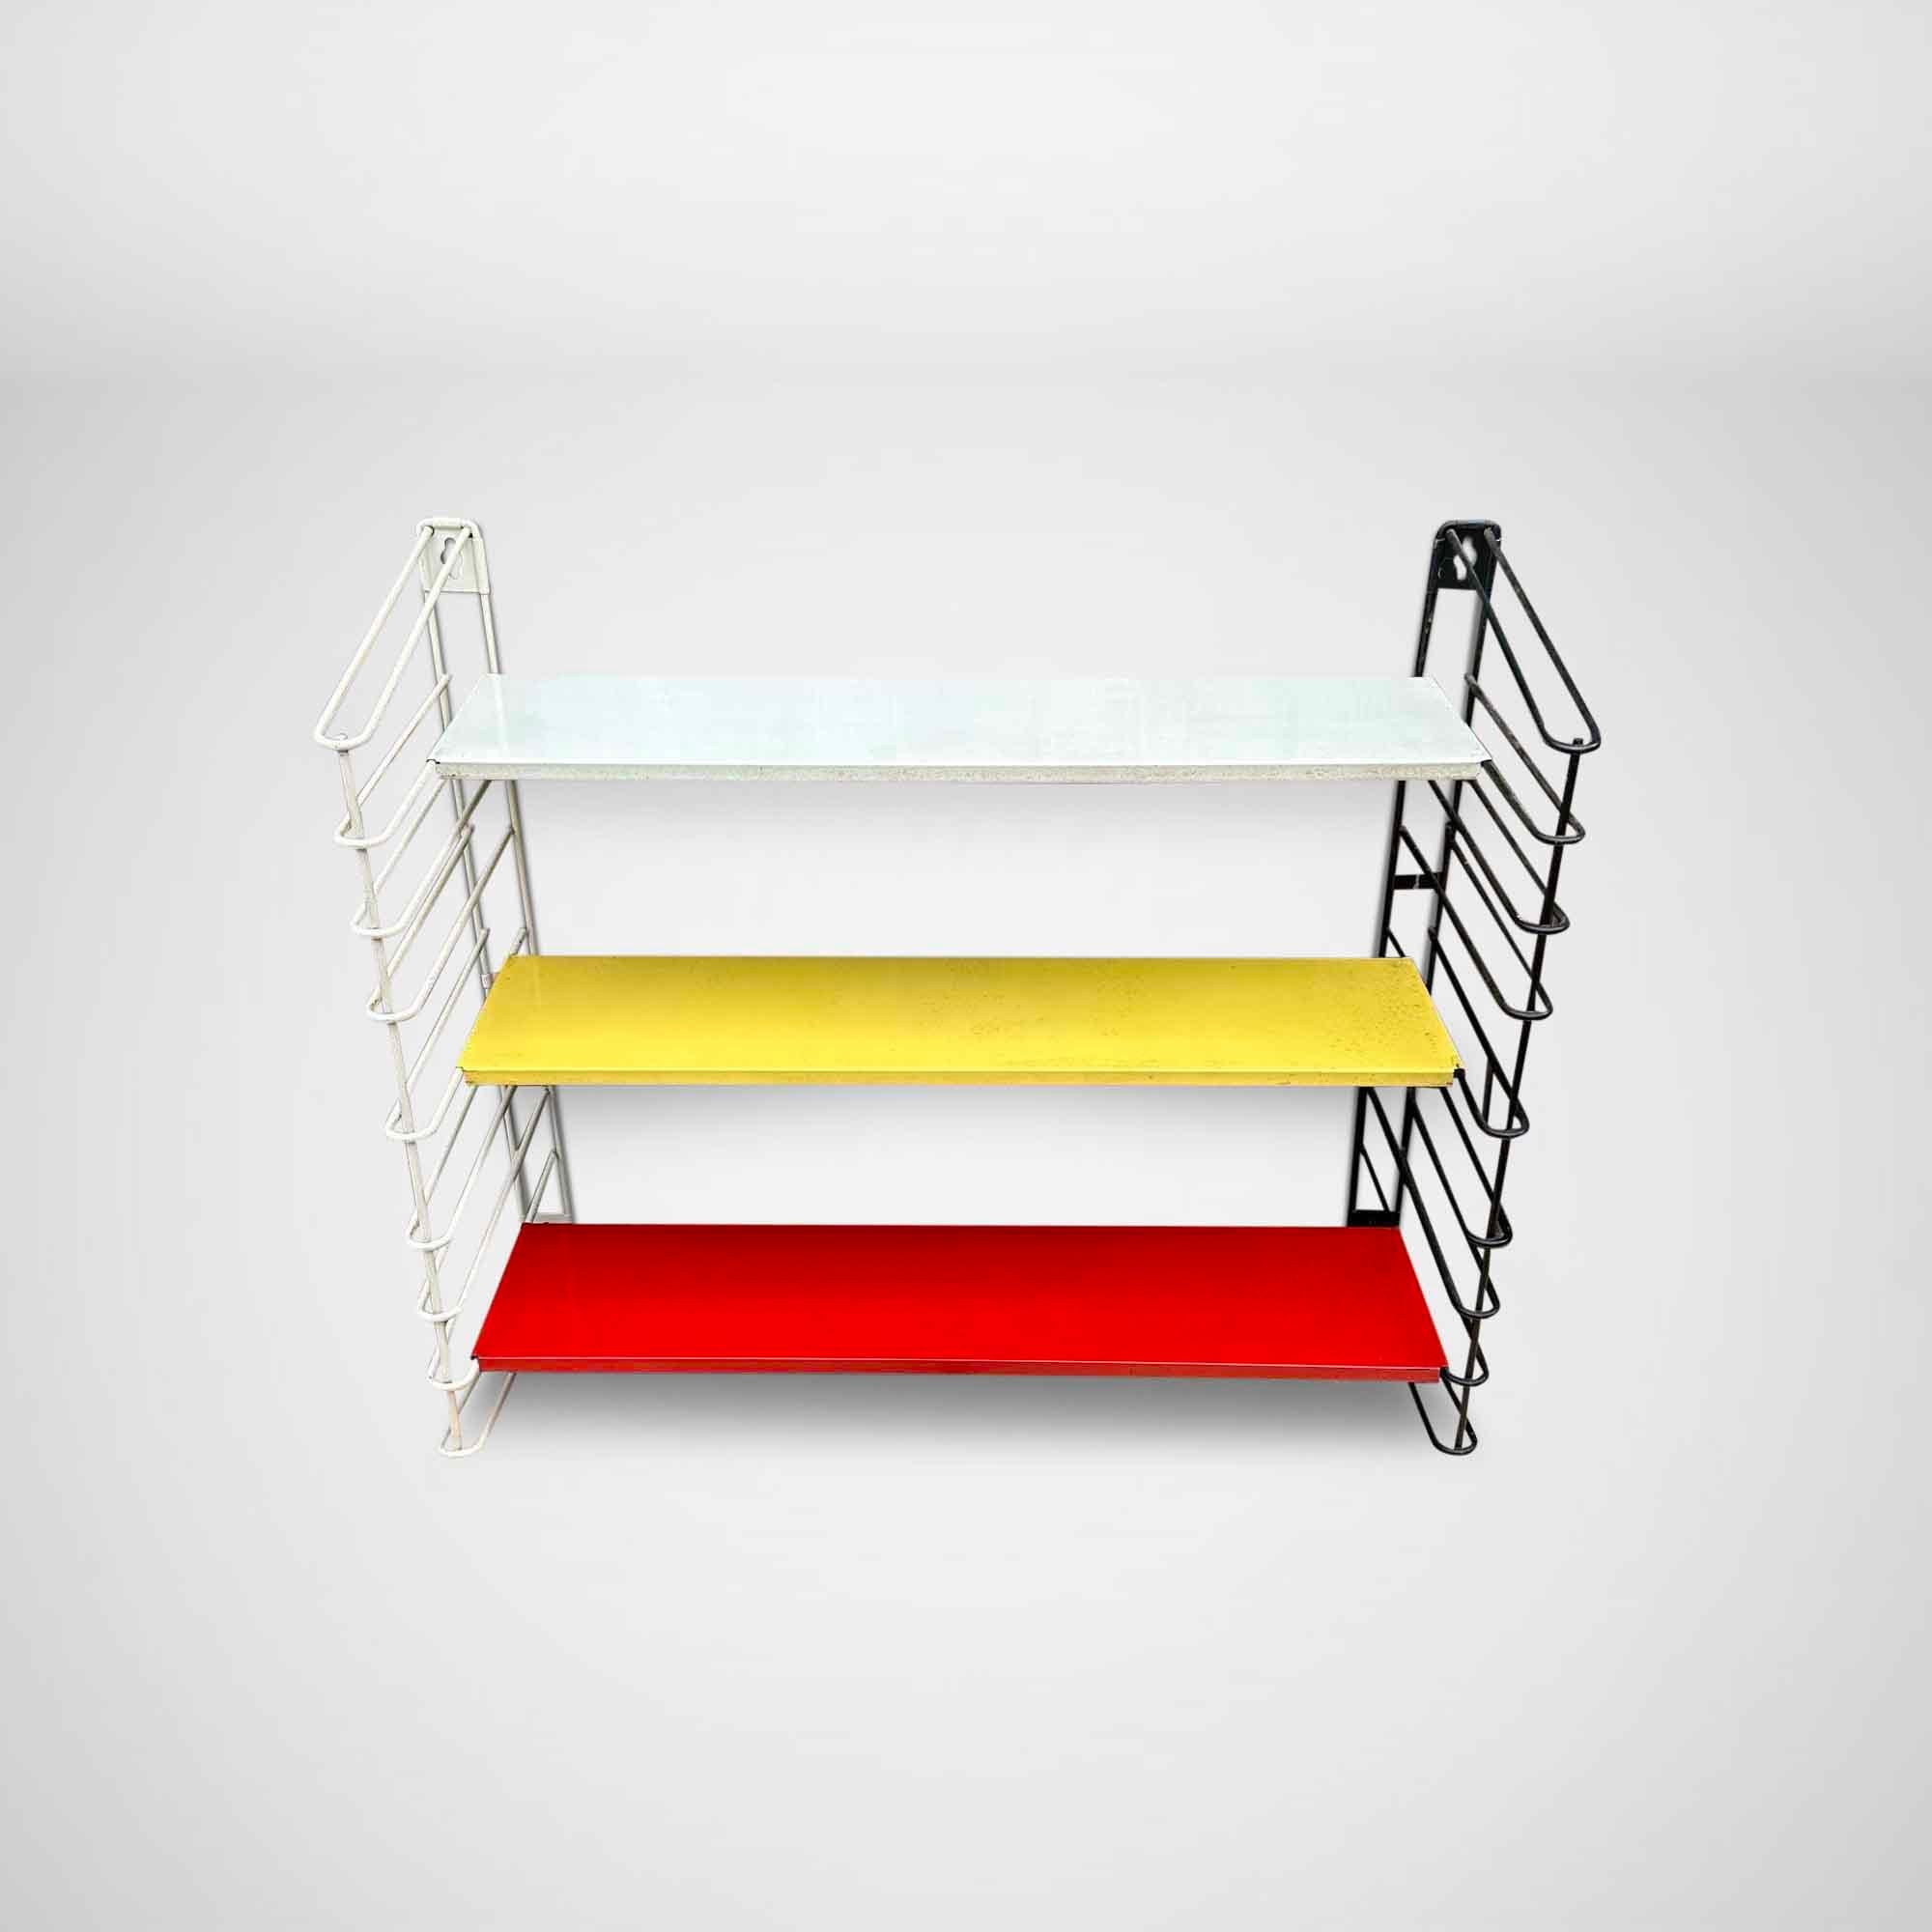 Beautiful mid-century wall rack by Adriaan Dekker for Tomado. The shelves are white, red, and yellow. The string shelves are black and white. This is a smaller model than most other Tomado wall units. The rack shows wear & tear (see